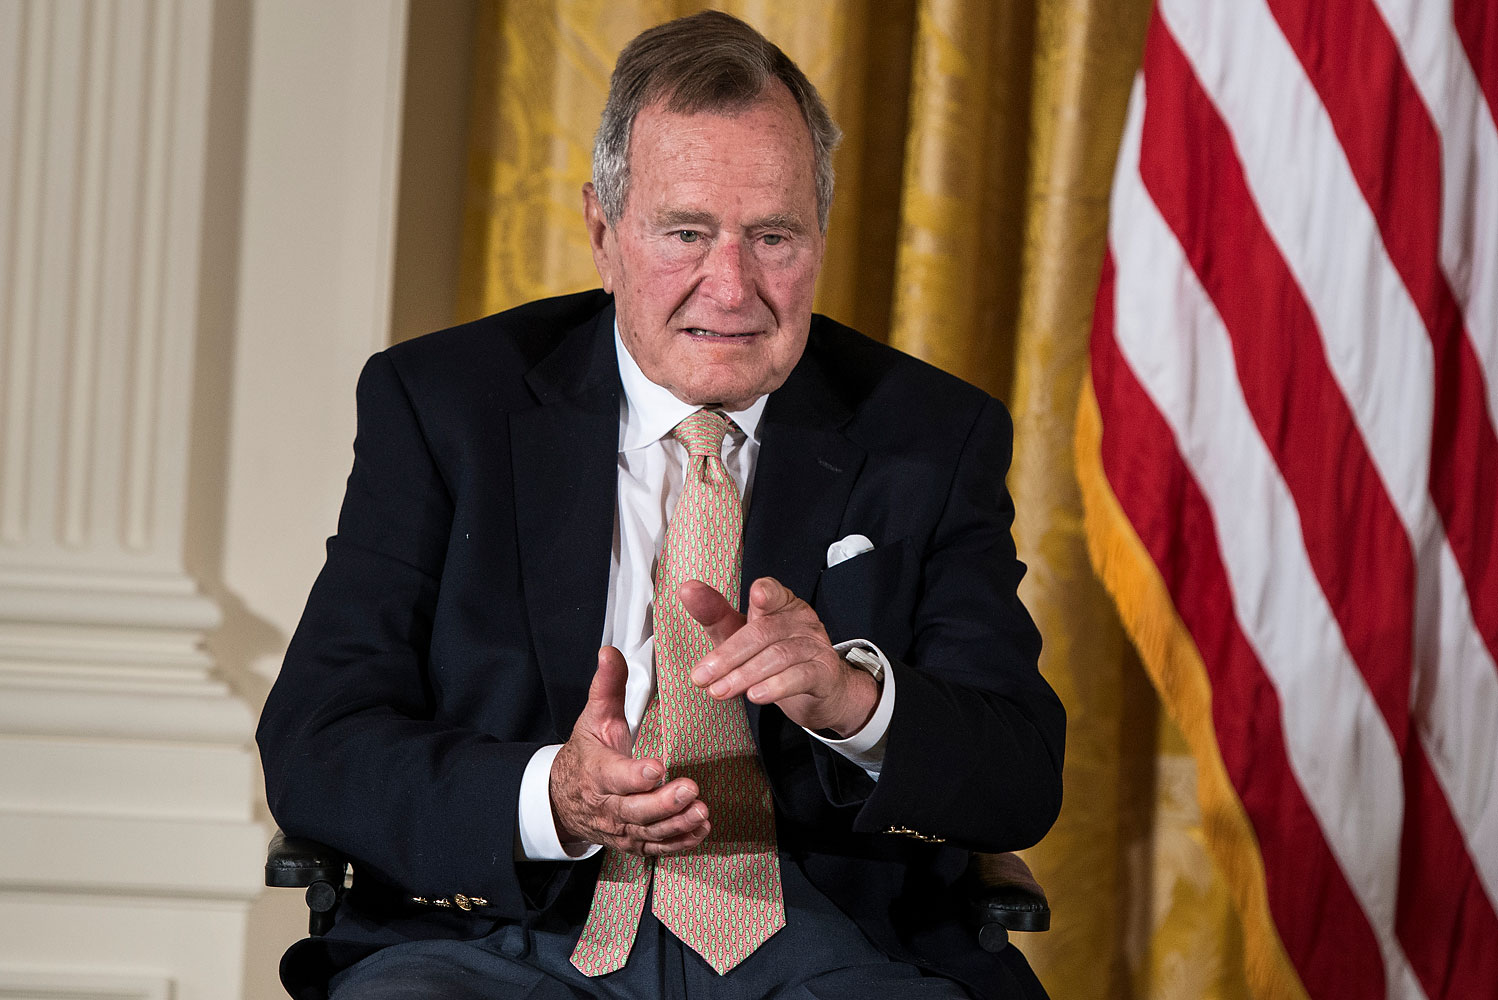 George H. W. Bush during an event in the East Room of the White House July 15, 2013 in Washington, DC.